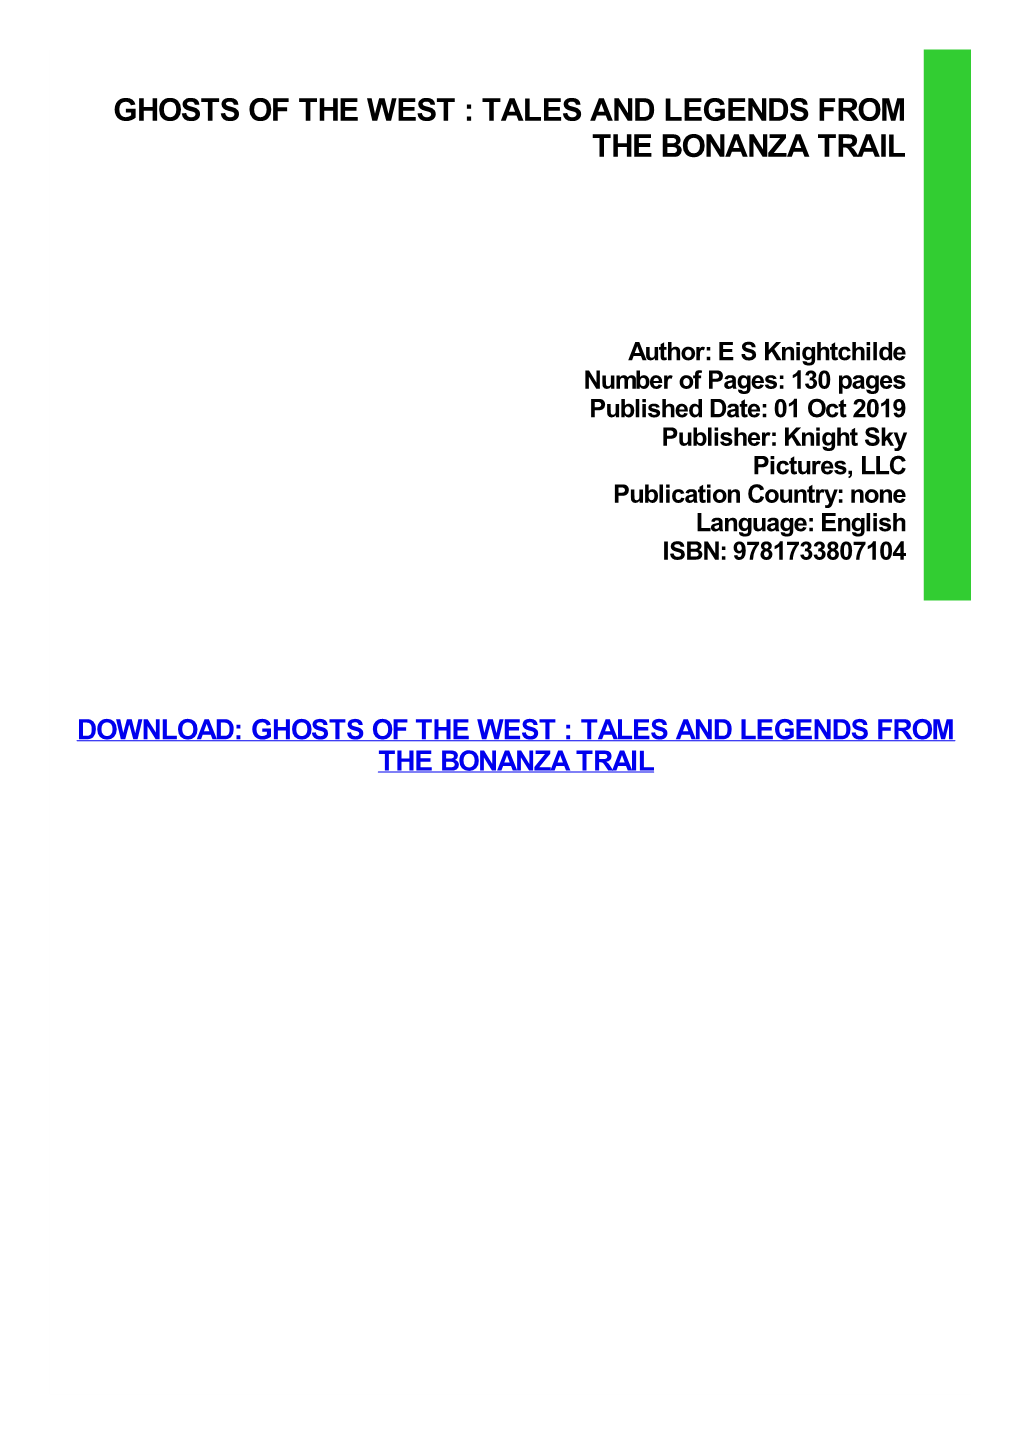 Ghosts of the West : Tales and Legends from the Bonanza Trail Ebook